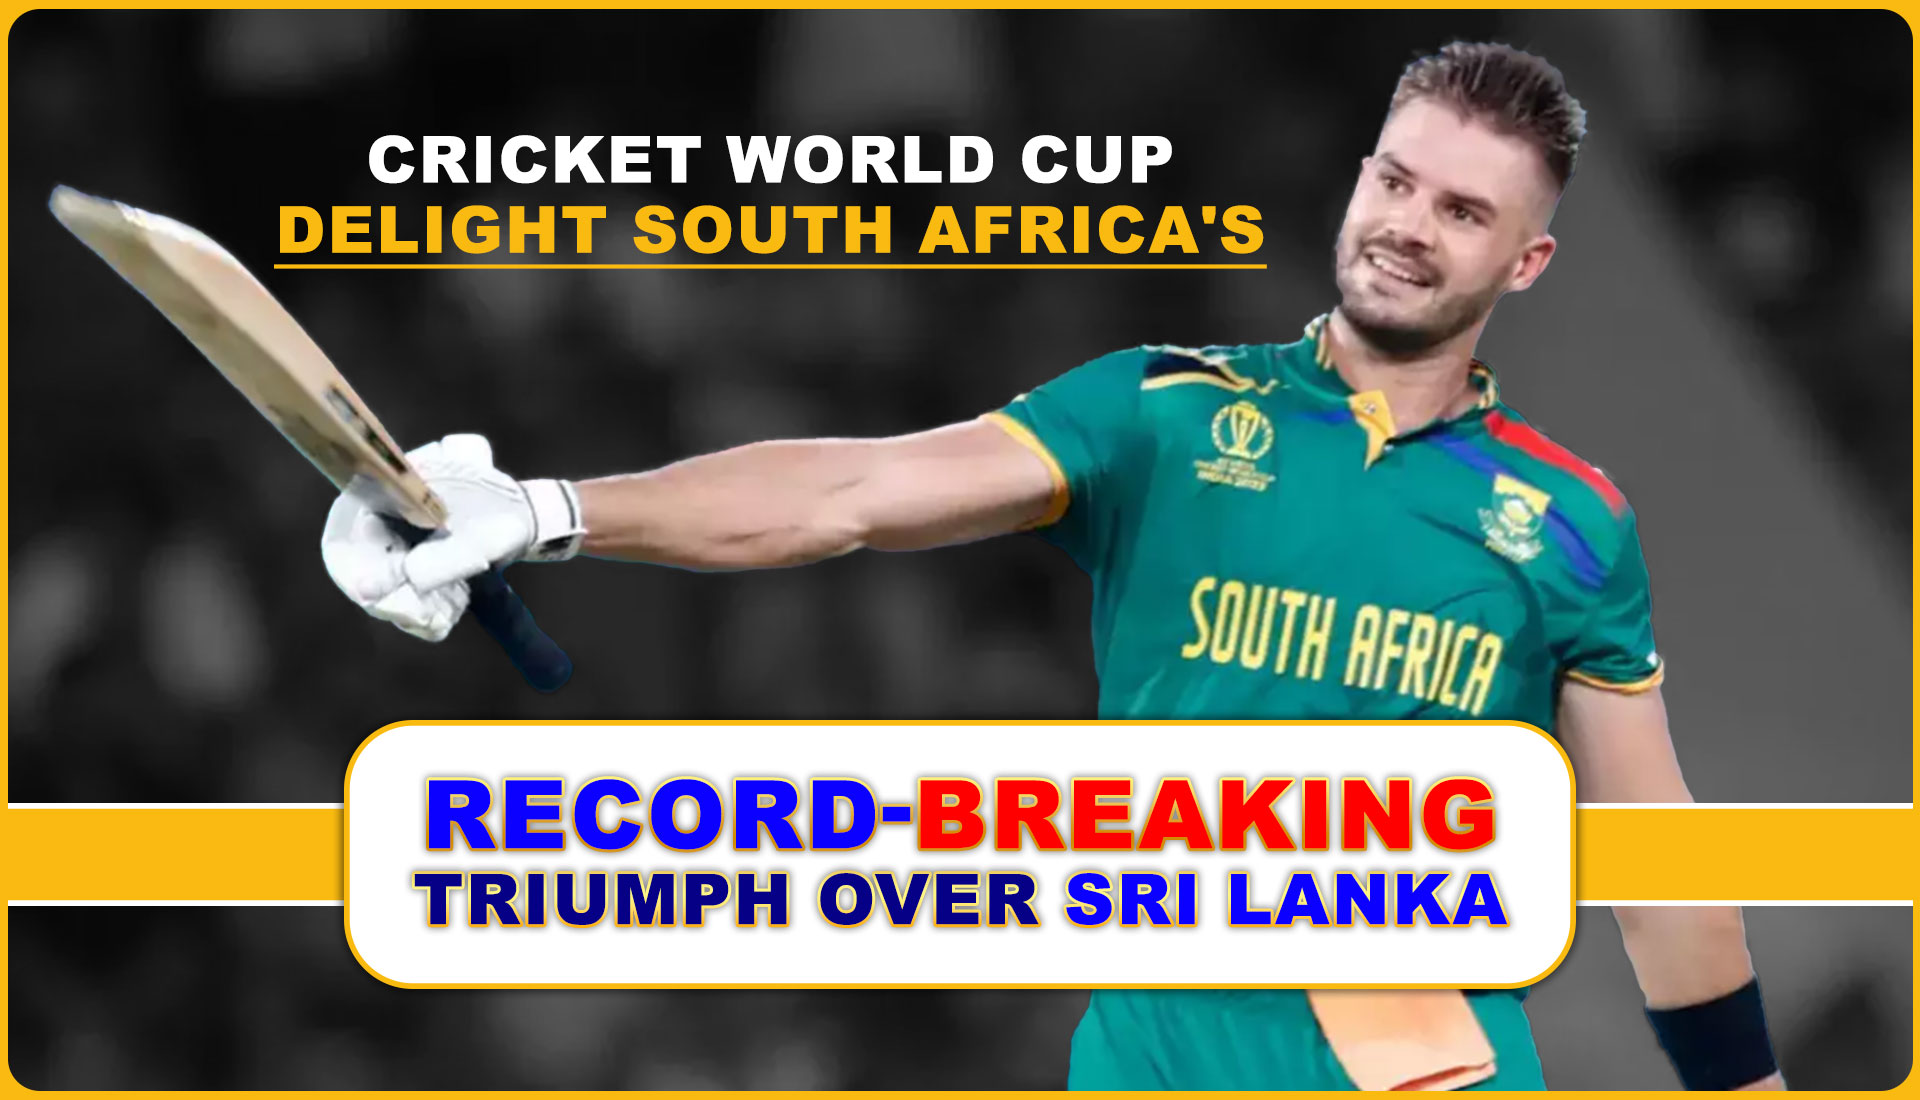 South Africa's Record-Breaking